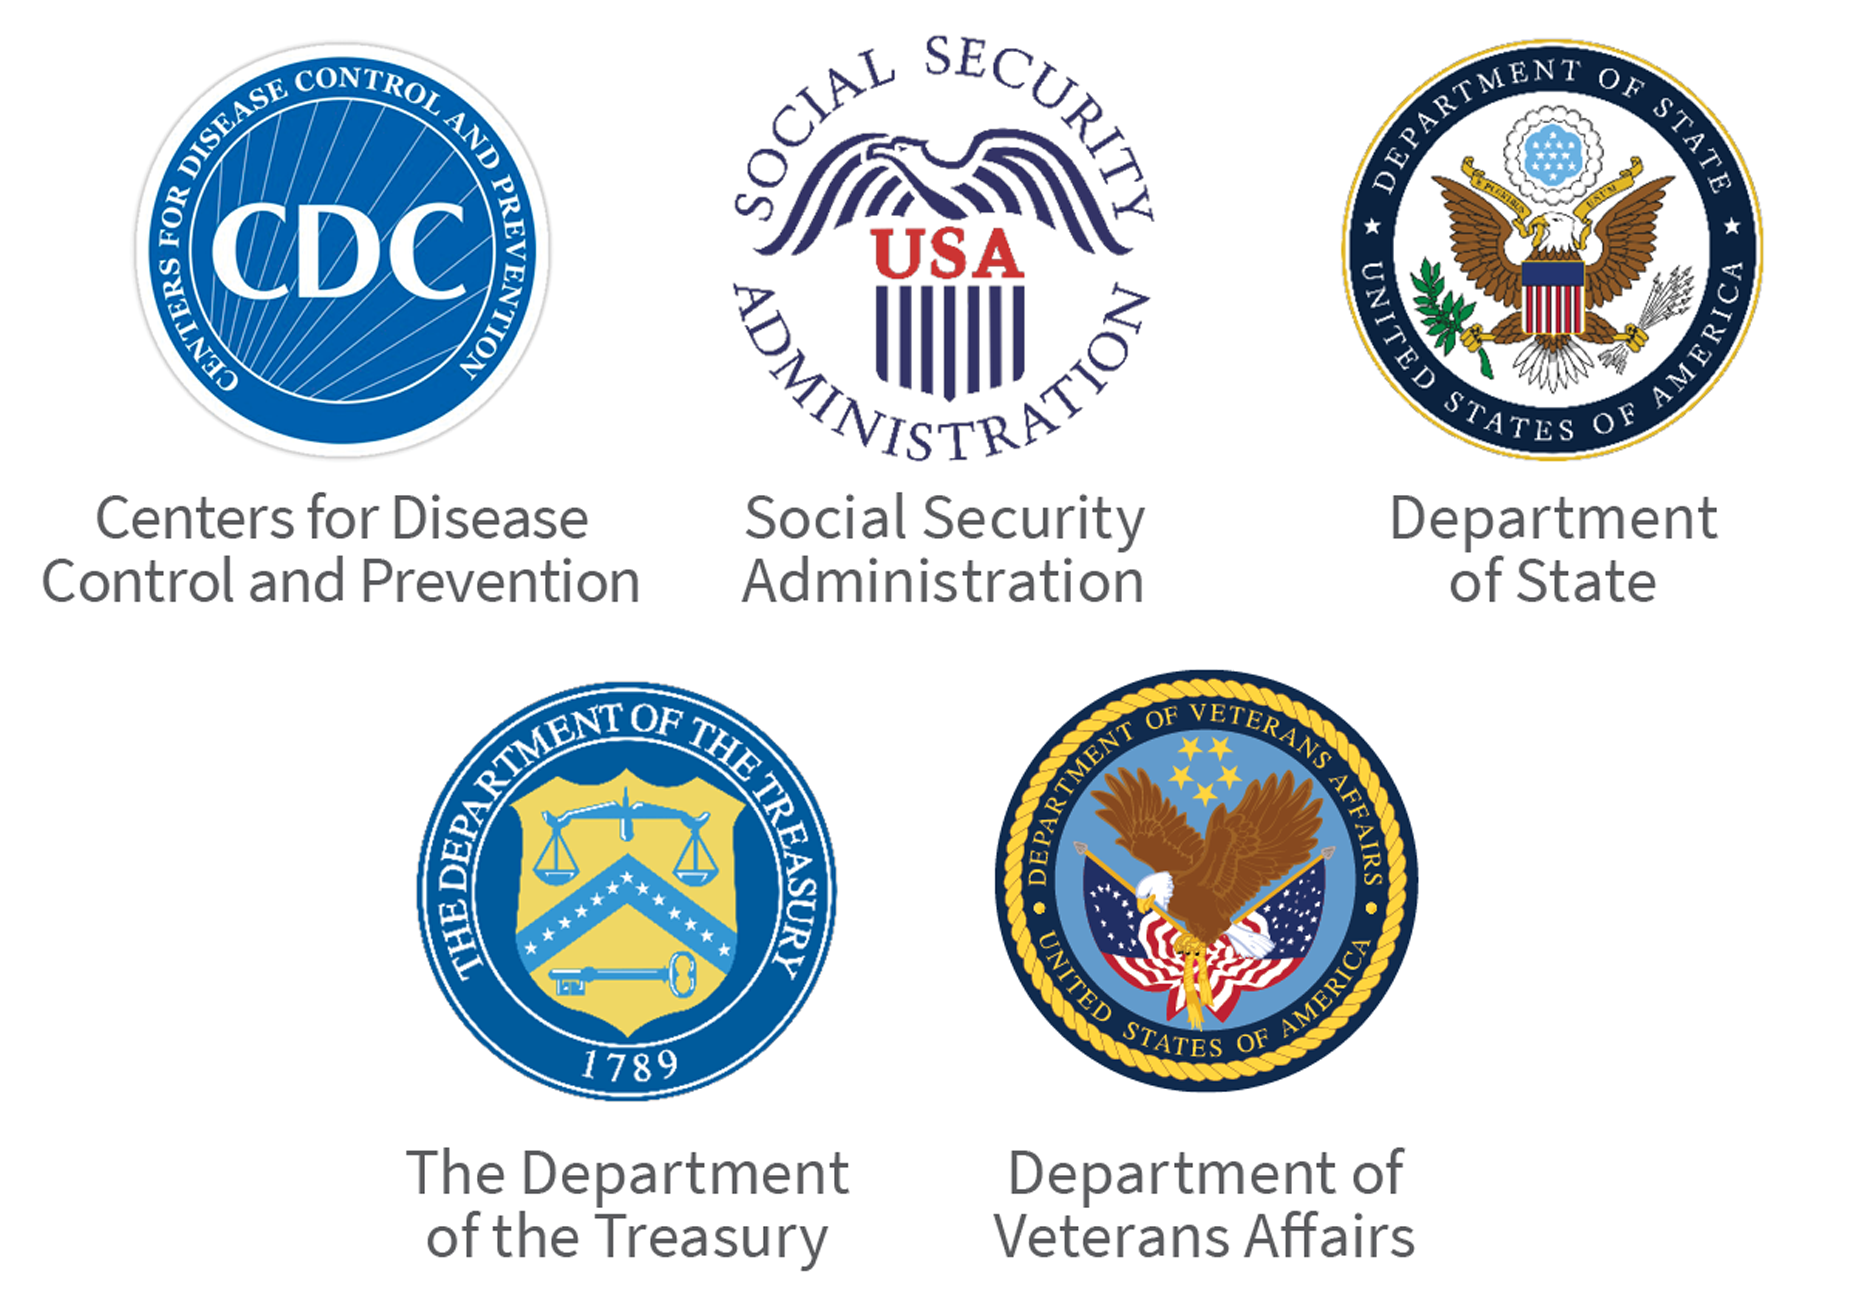 government agency seals for CDC, SSA, State, Treasury and VA